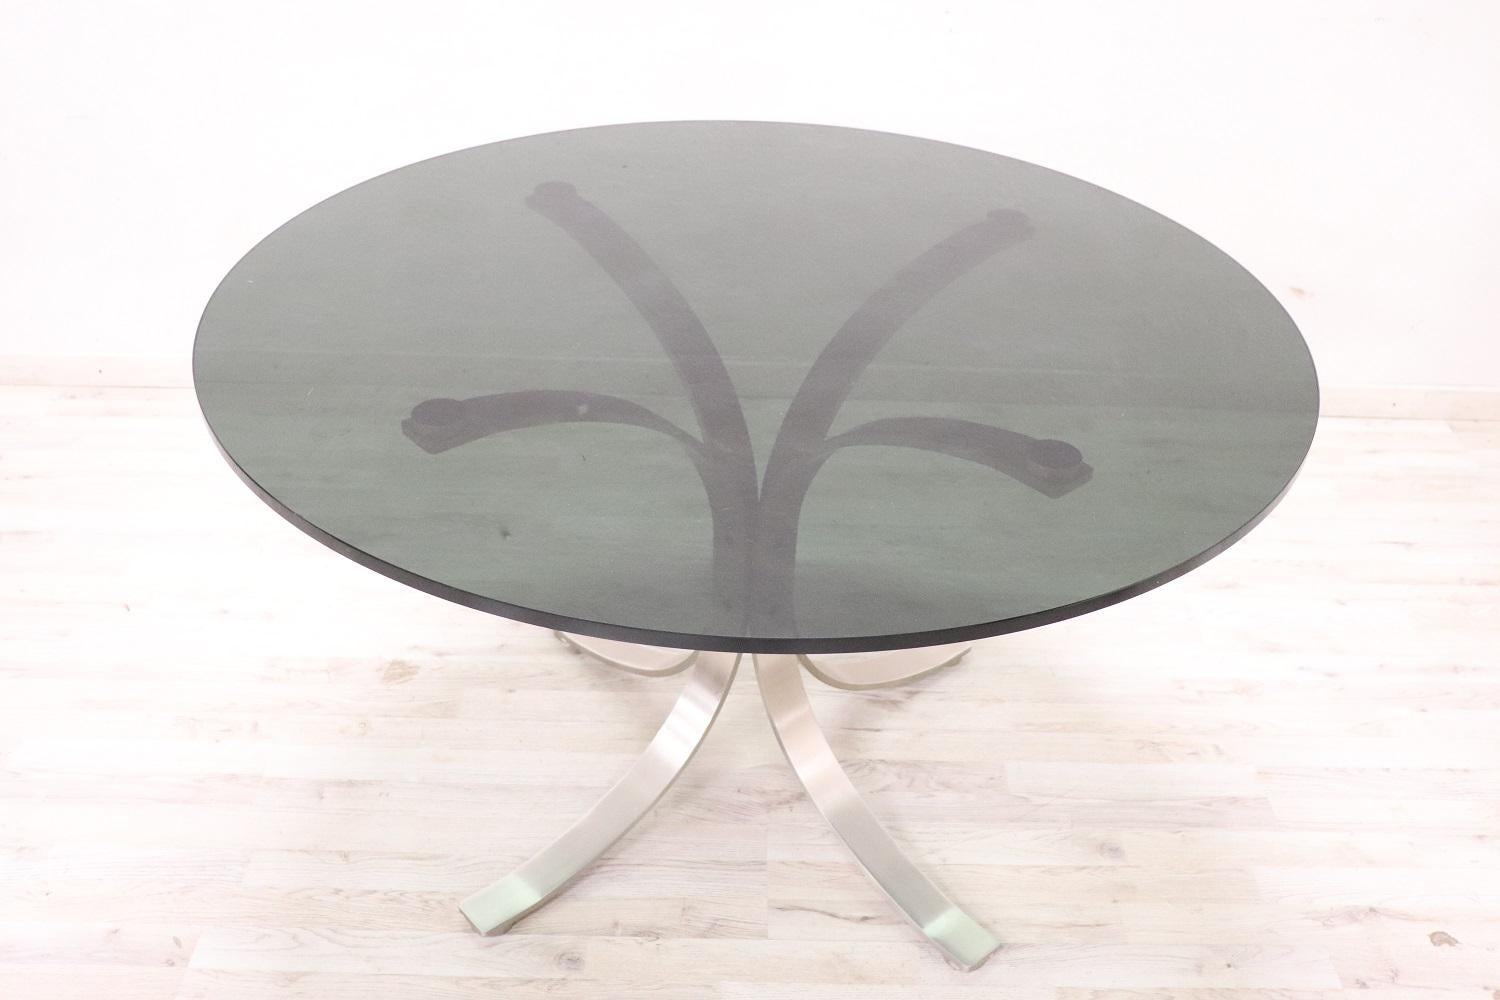 Beautiful italian design round dining room table, 1970s. The table has wavy steel legs and a thick smoked glass top. The top can be separated from the legs for easy movement. Good general condition, small signs of wear on the top. Perfect table for